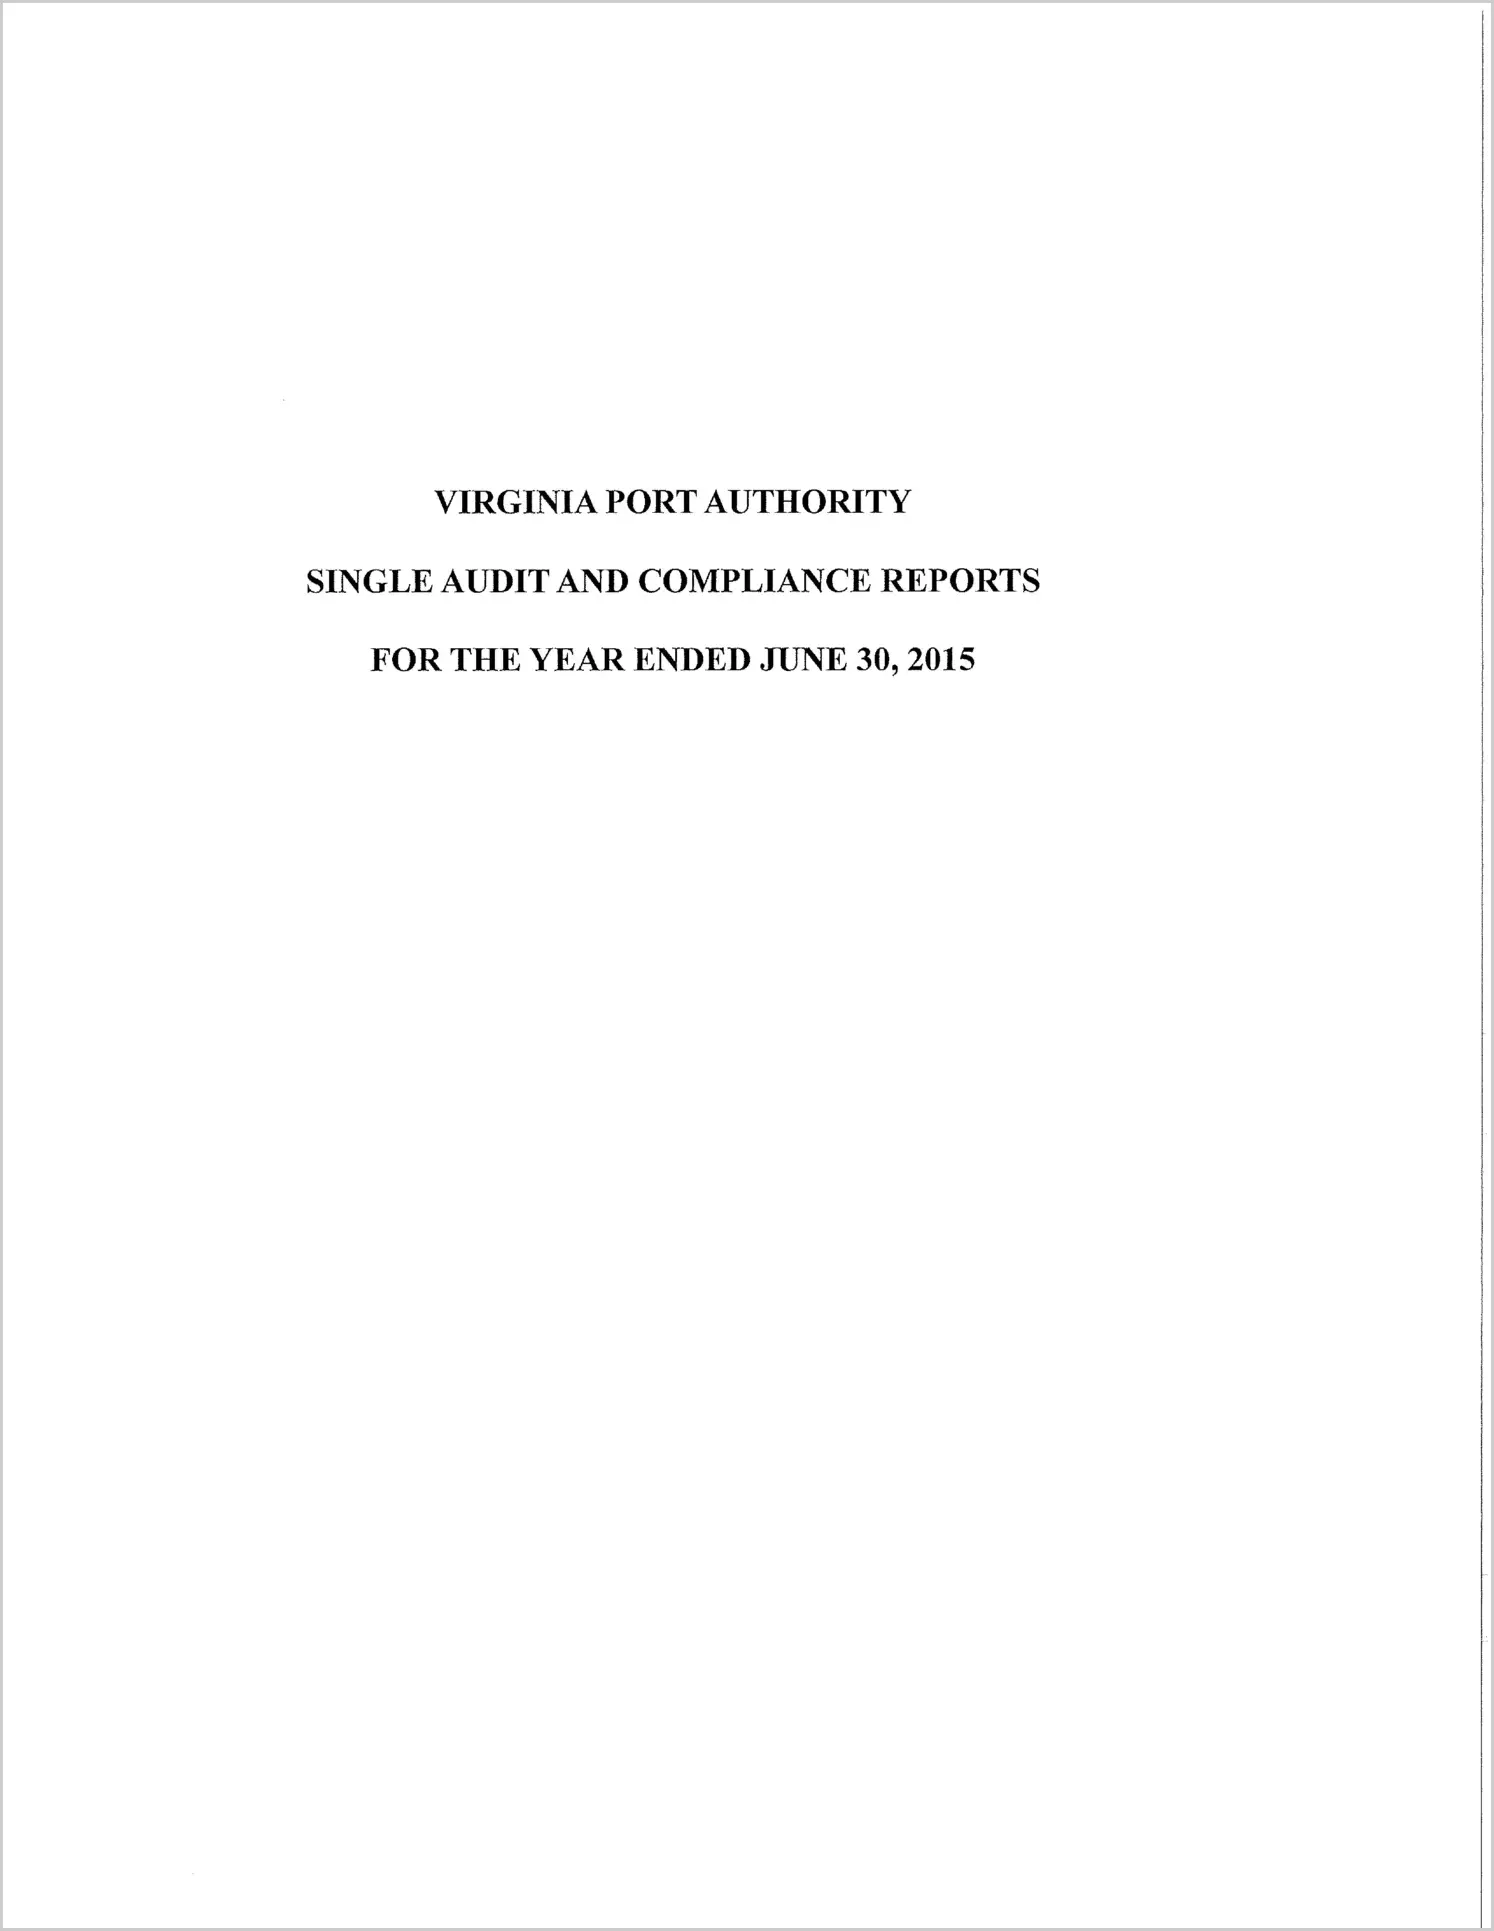 Virginia Port Authority for the year ended June 30, 2015